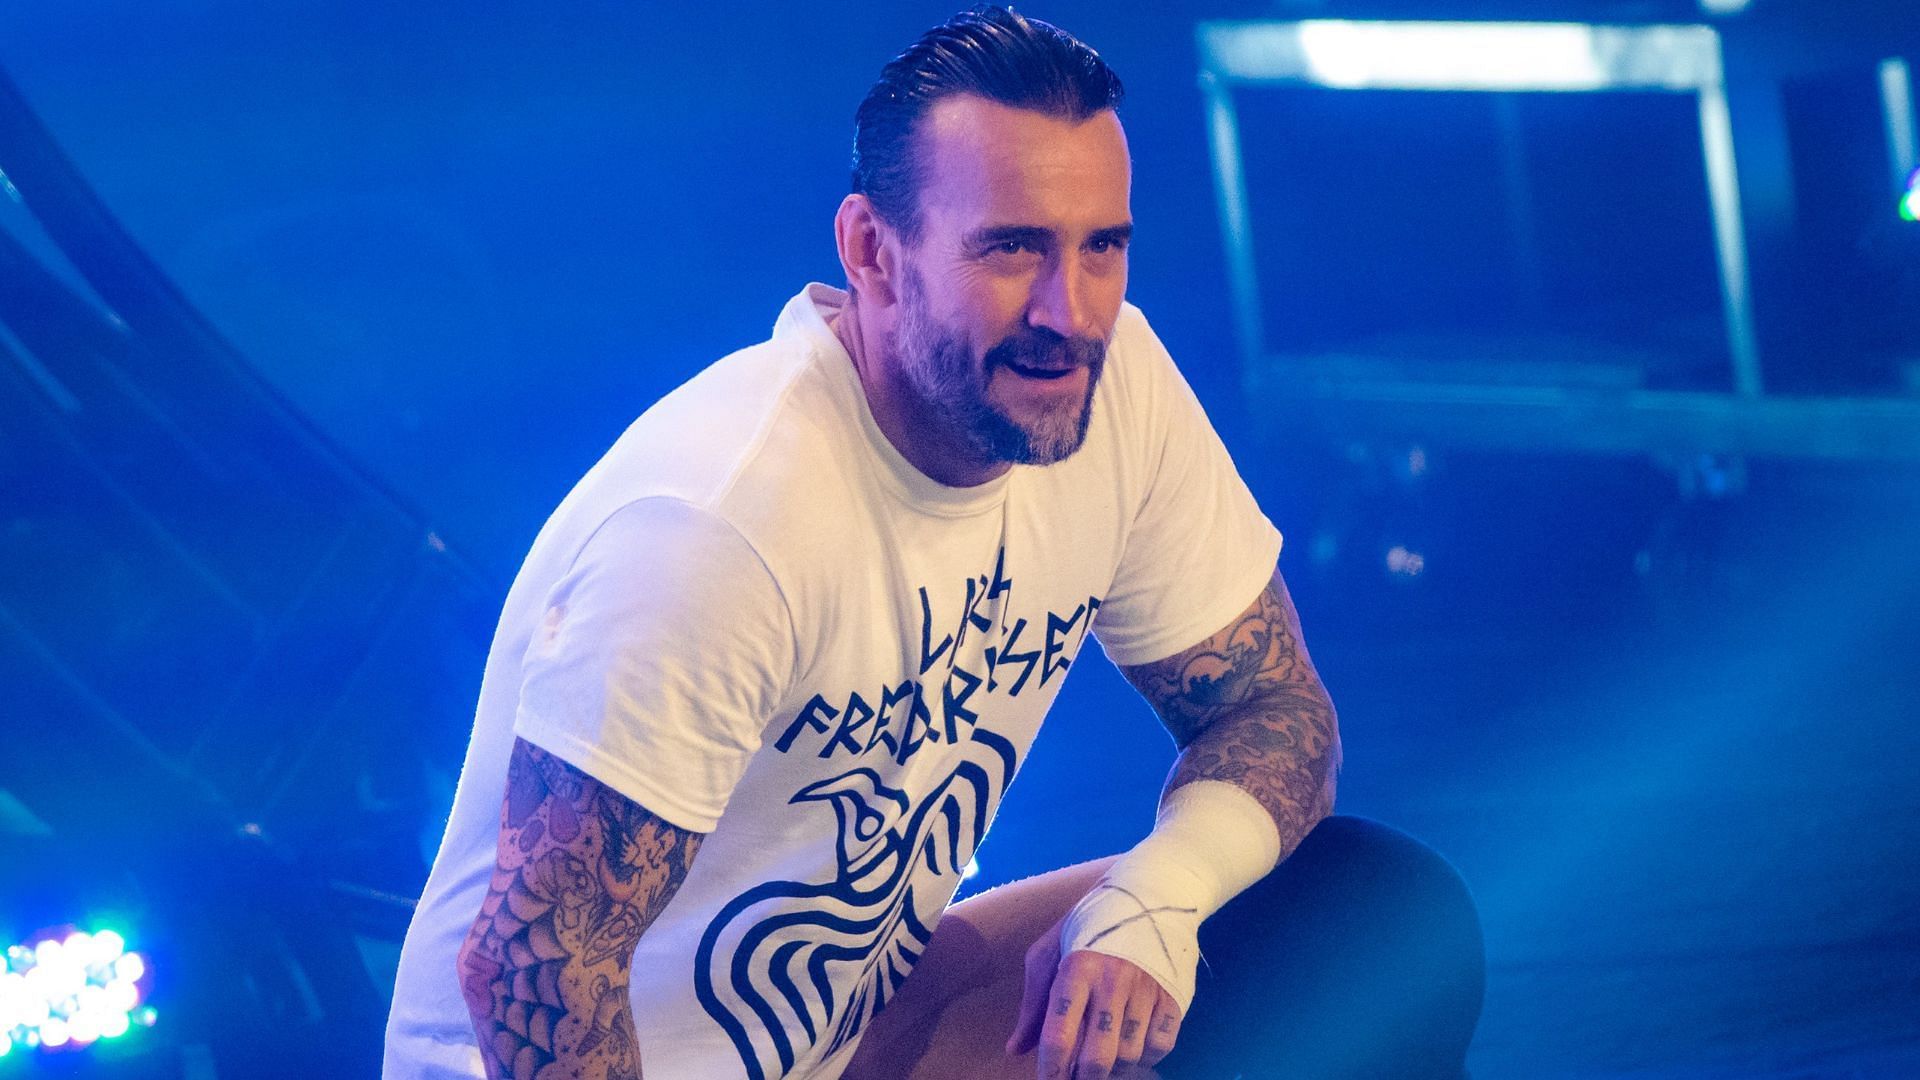 CM Punk making his entrance at an AEW event